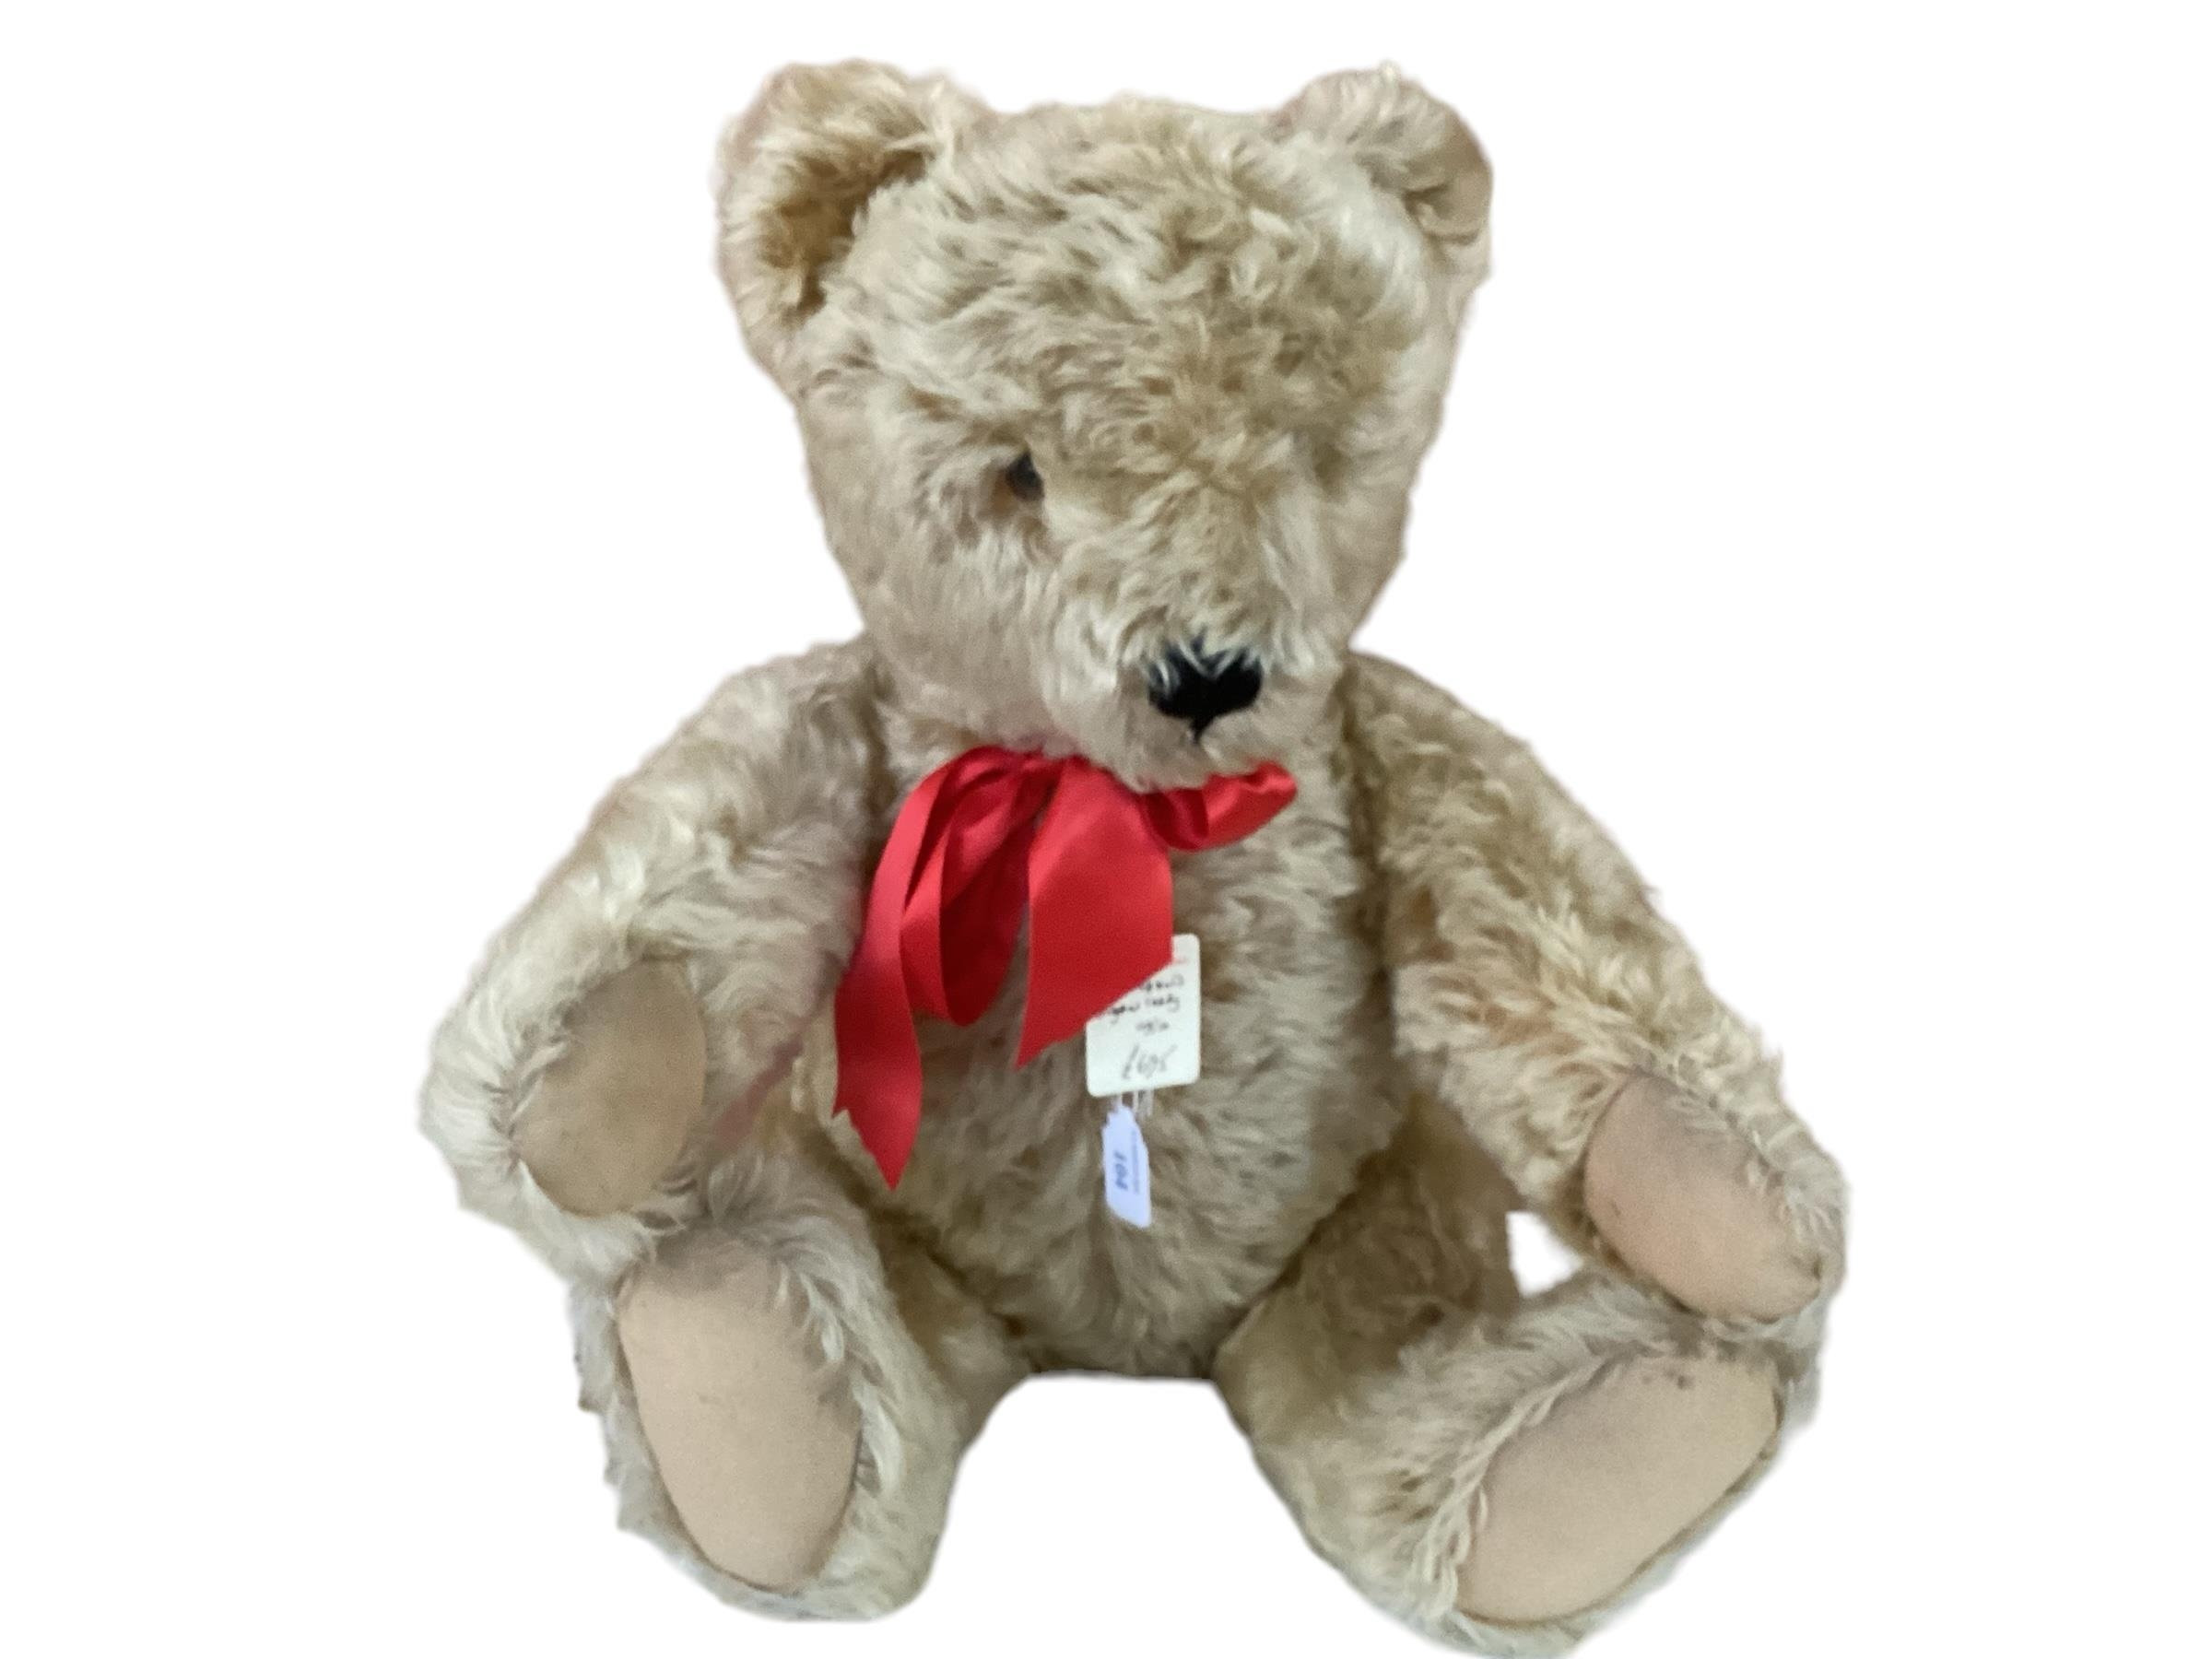 Original Steiff bear with button, 65cm Blonde, 1950 in good condition, slight light markings to - Image 13 of 13